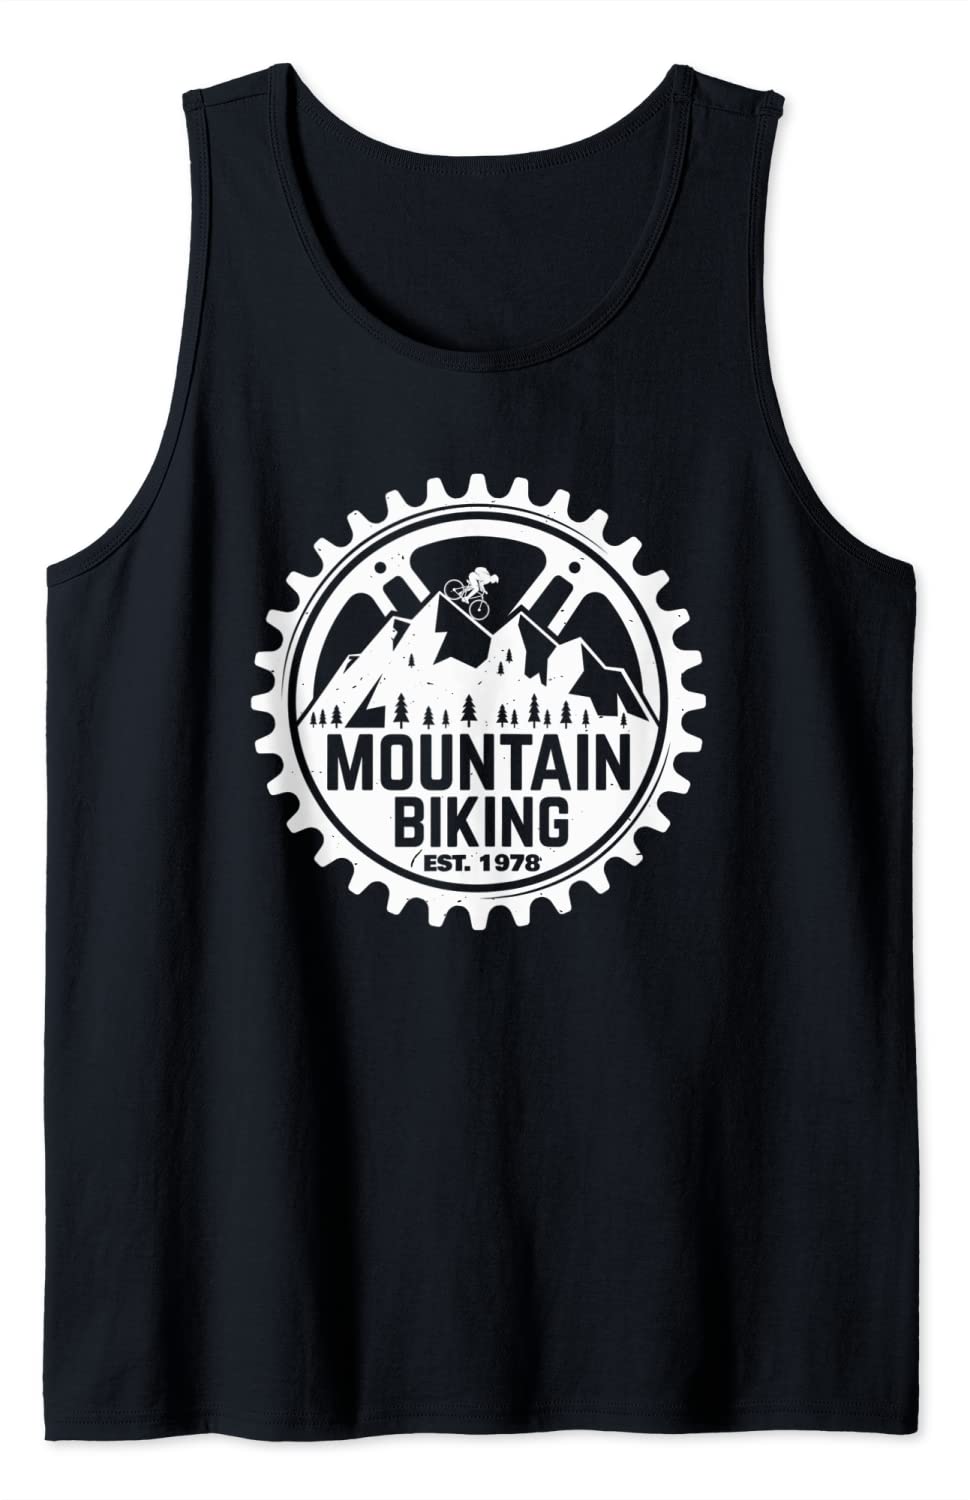 Logo Cycling Jersey Dh Mx Bmx Mtb Mountain Team Cycling Clothing Mountain Downhill Bike Cycling Jersey Quick Dry Independent Custom Made Cycling <a href='/cycling-jerseys/'>Cycling Jerseys</a>